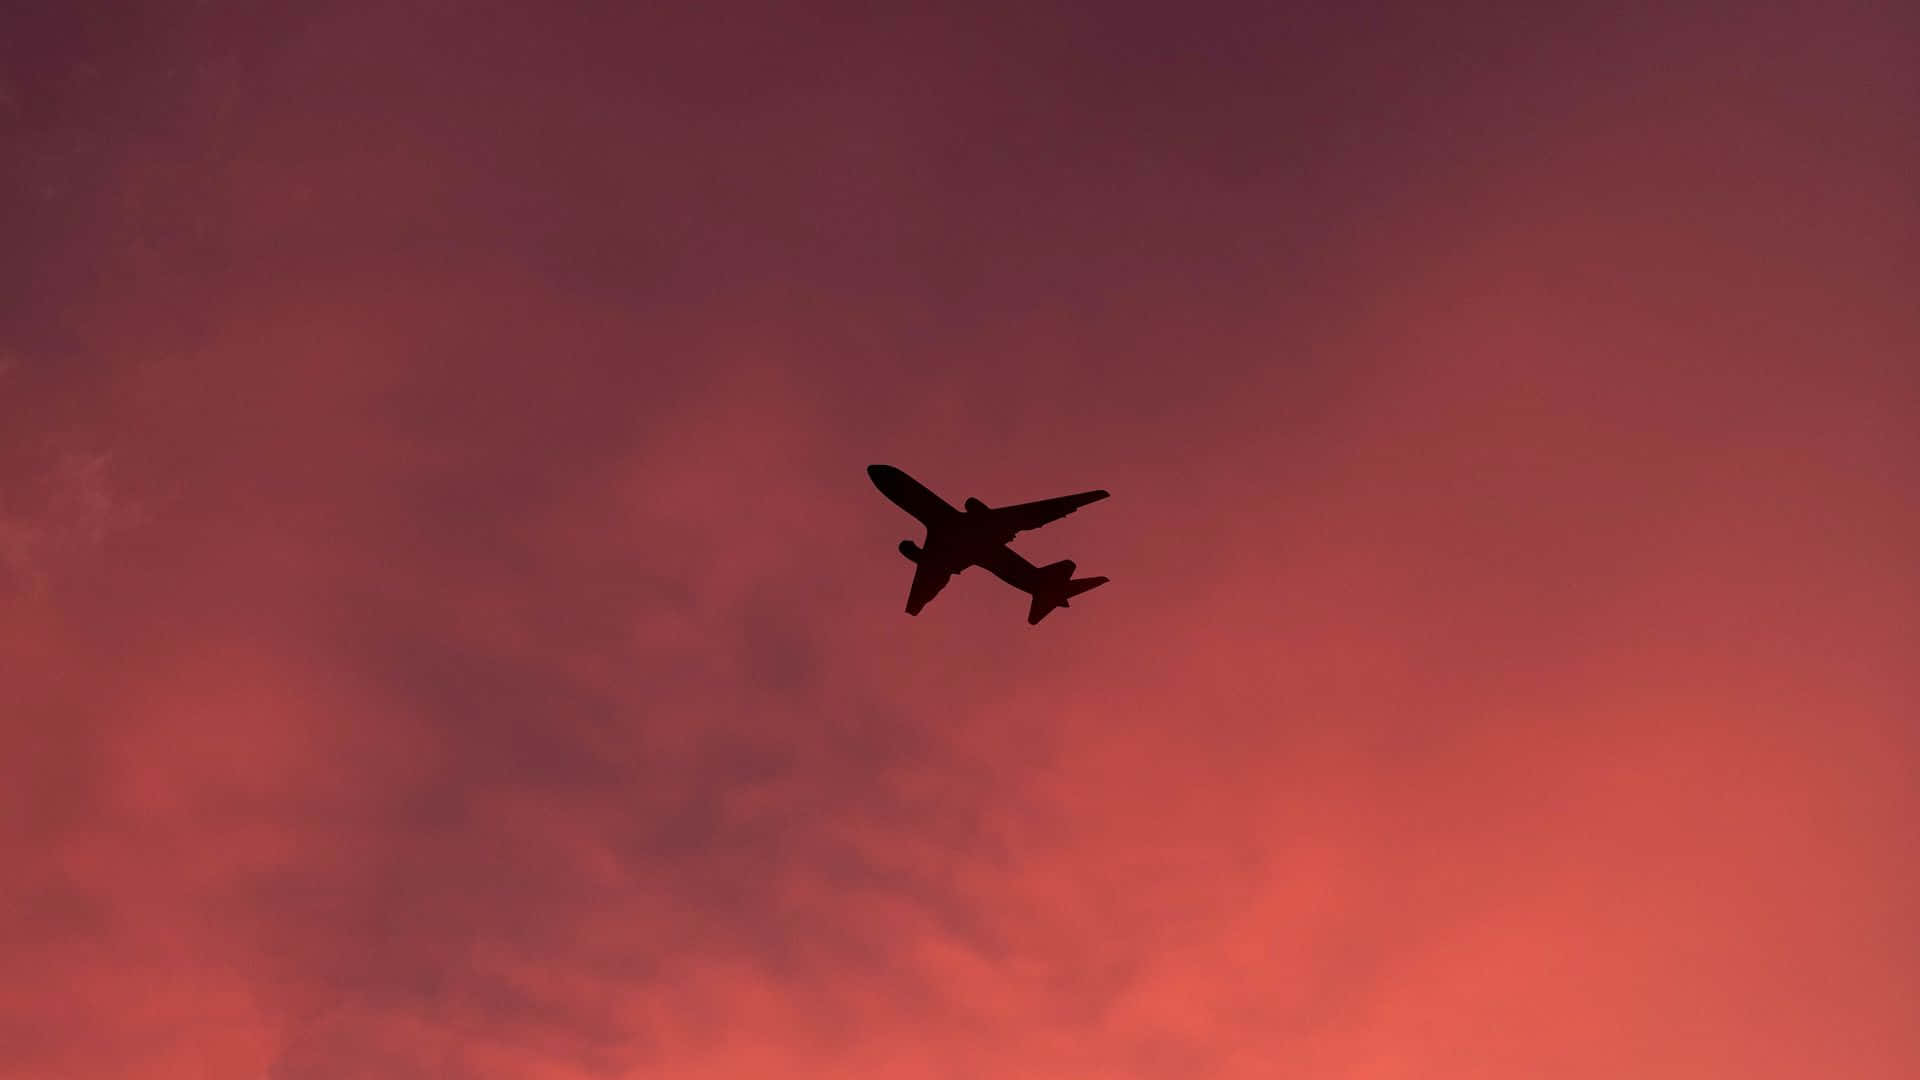 Experience the Beauty of Flight in a Gorgeous Pink Plane Wallpaper